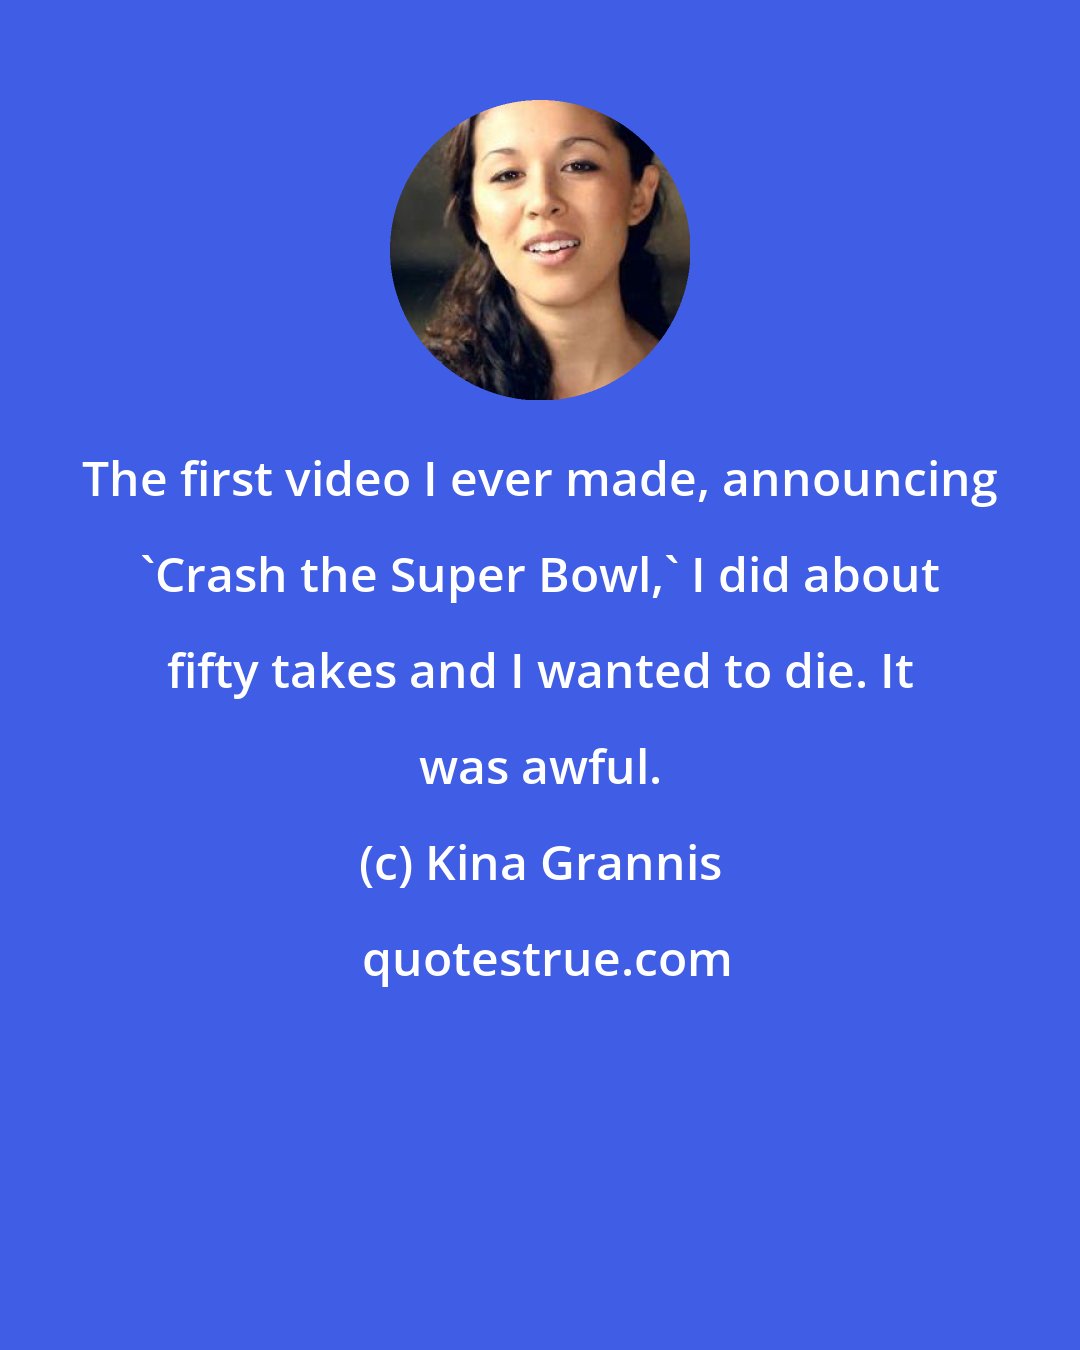 Kina Grannis: The first video I ever made, announcing 'Crash the Super Bowl,' I did about fifty takes and I wanted to die. It was awful.